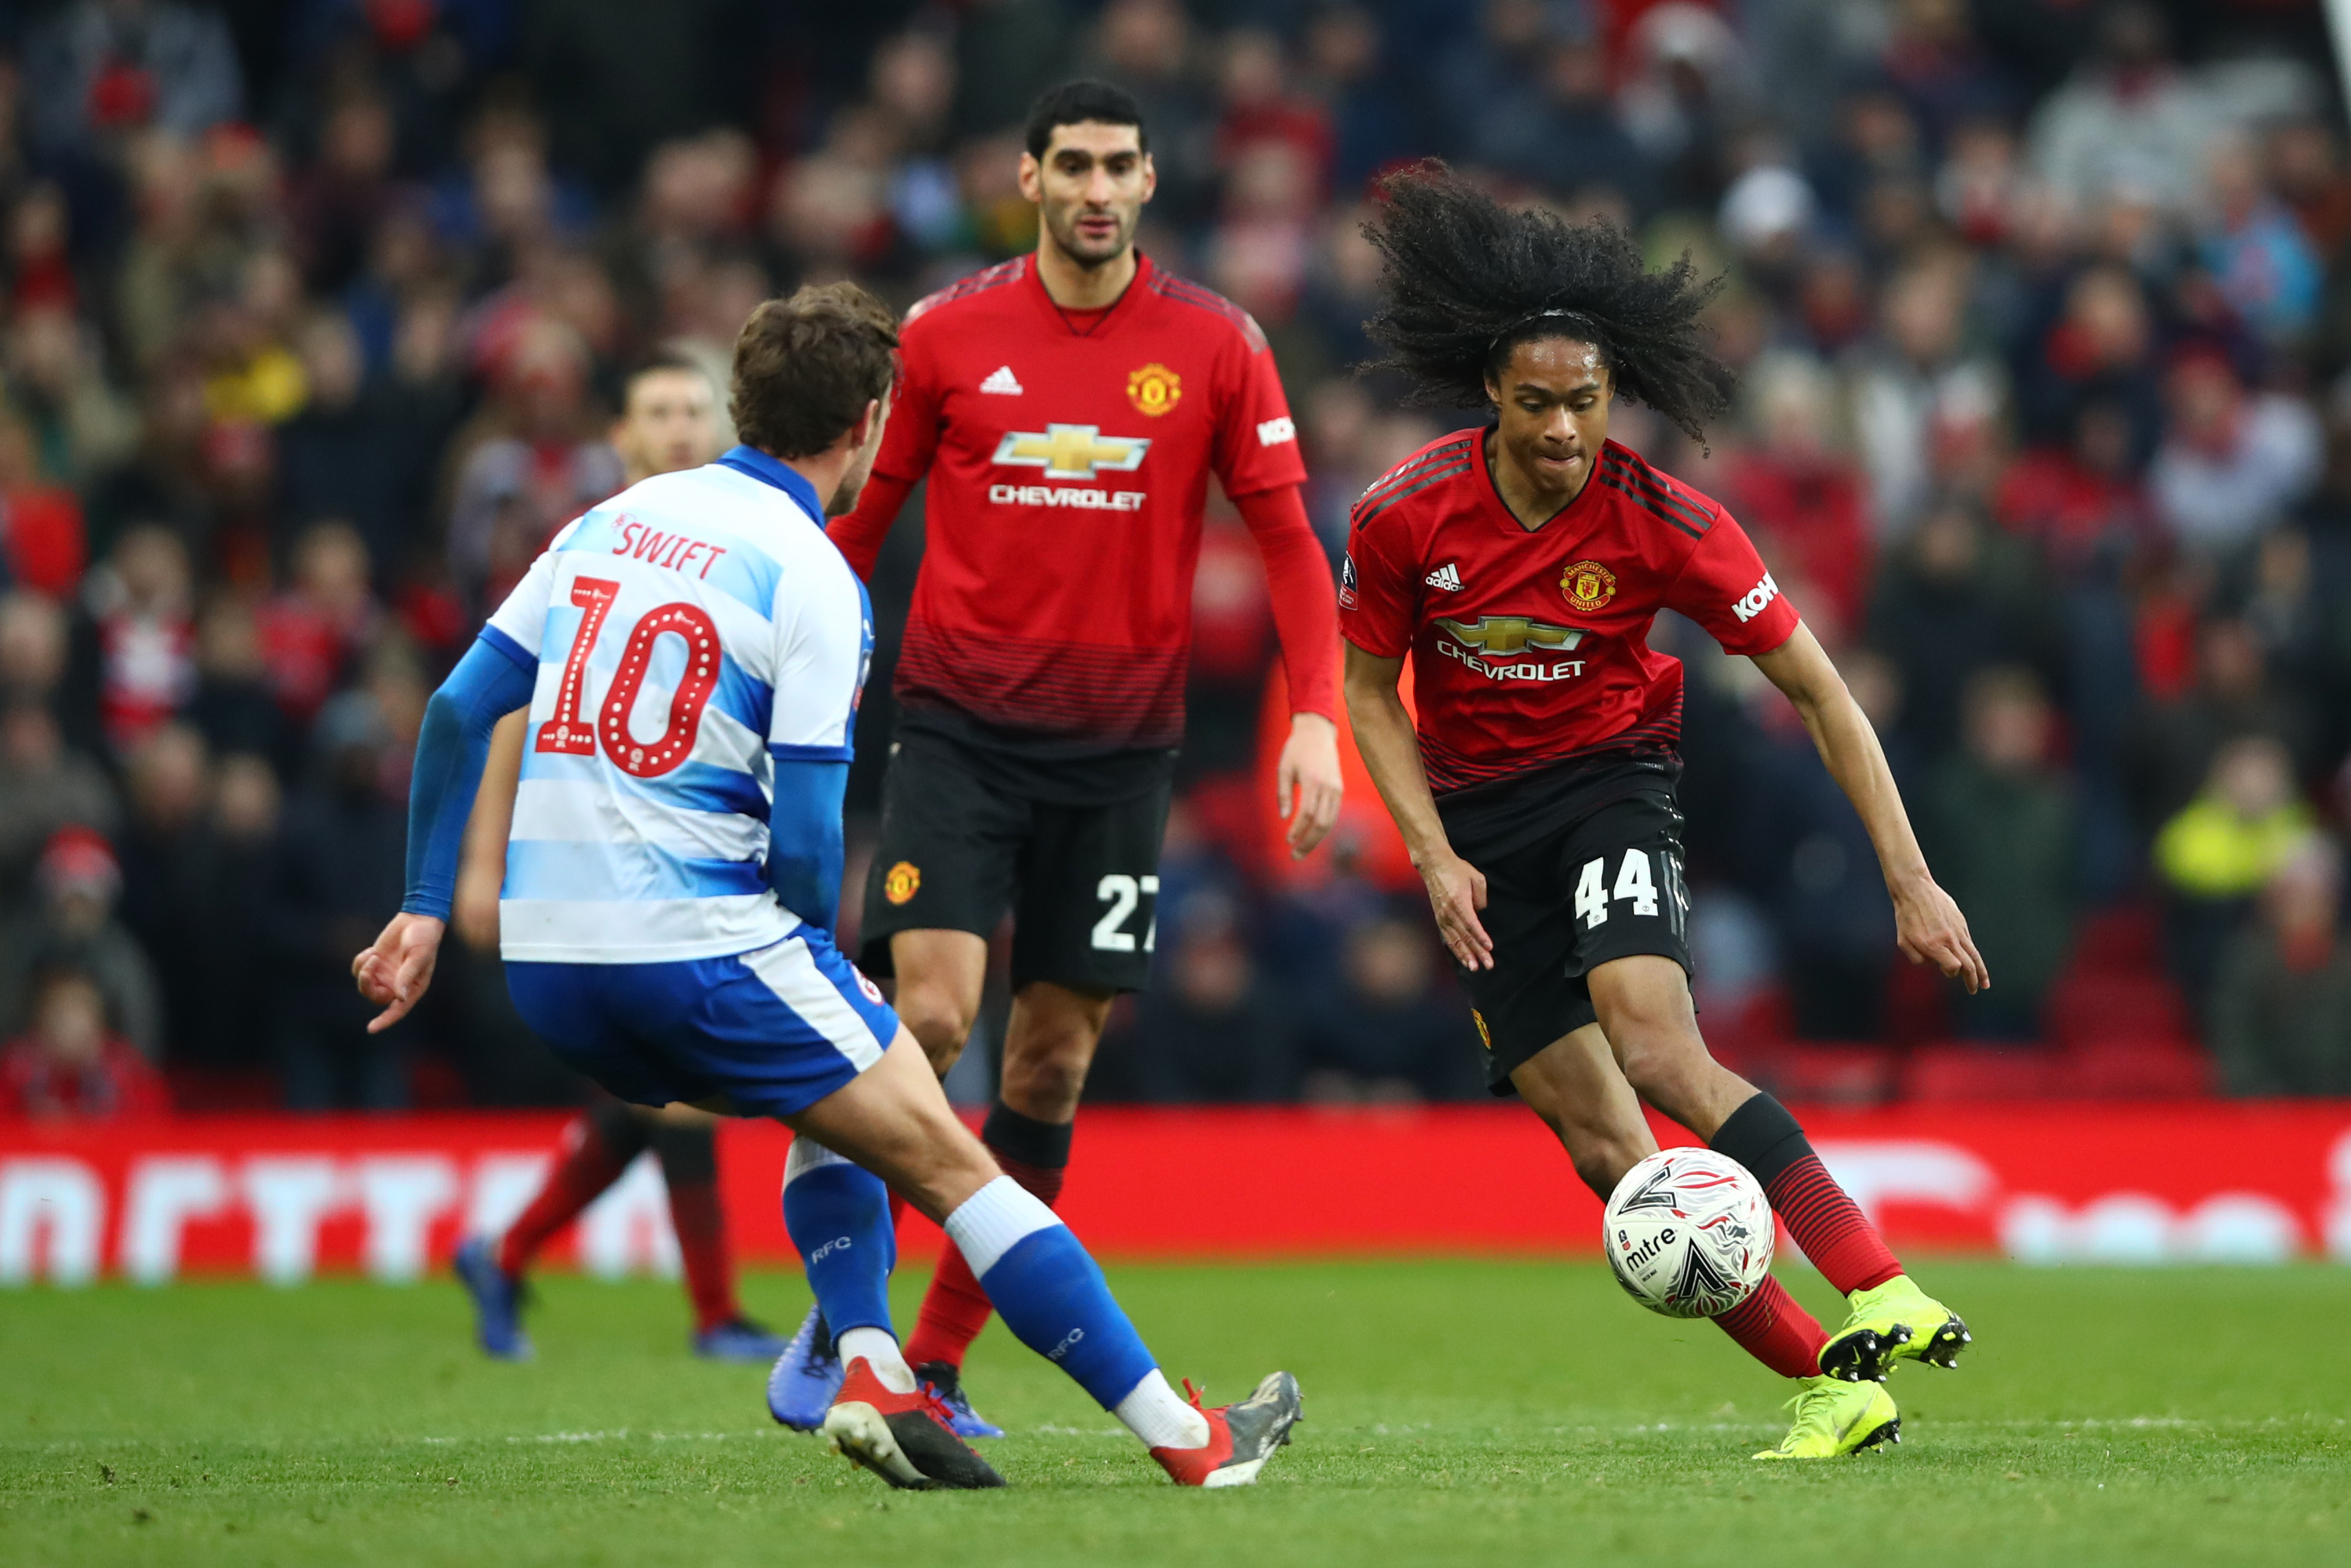 Manchester United v Reading - FA Cup Third Round